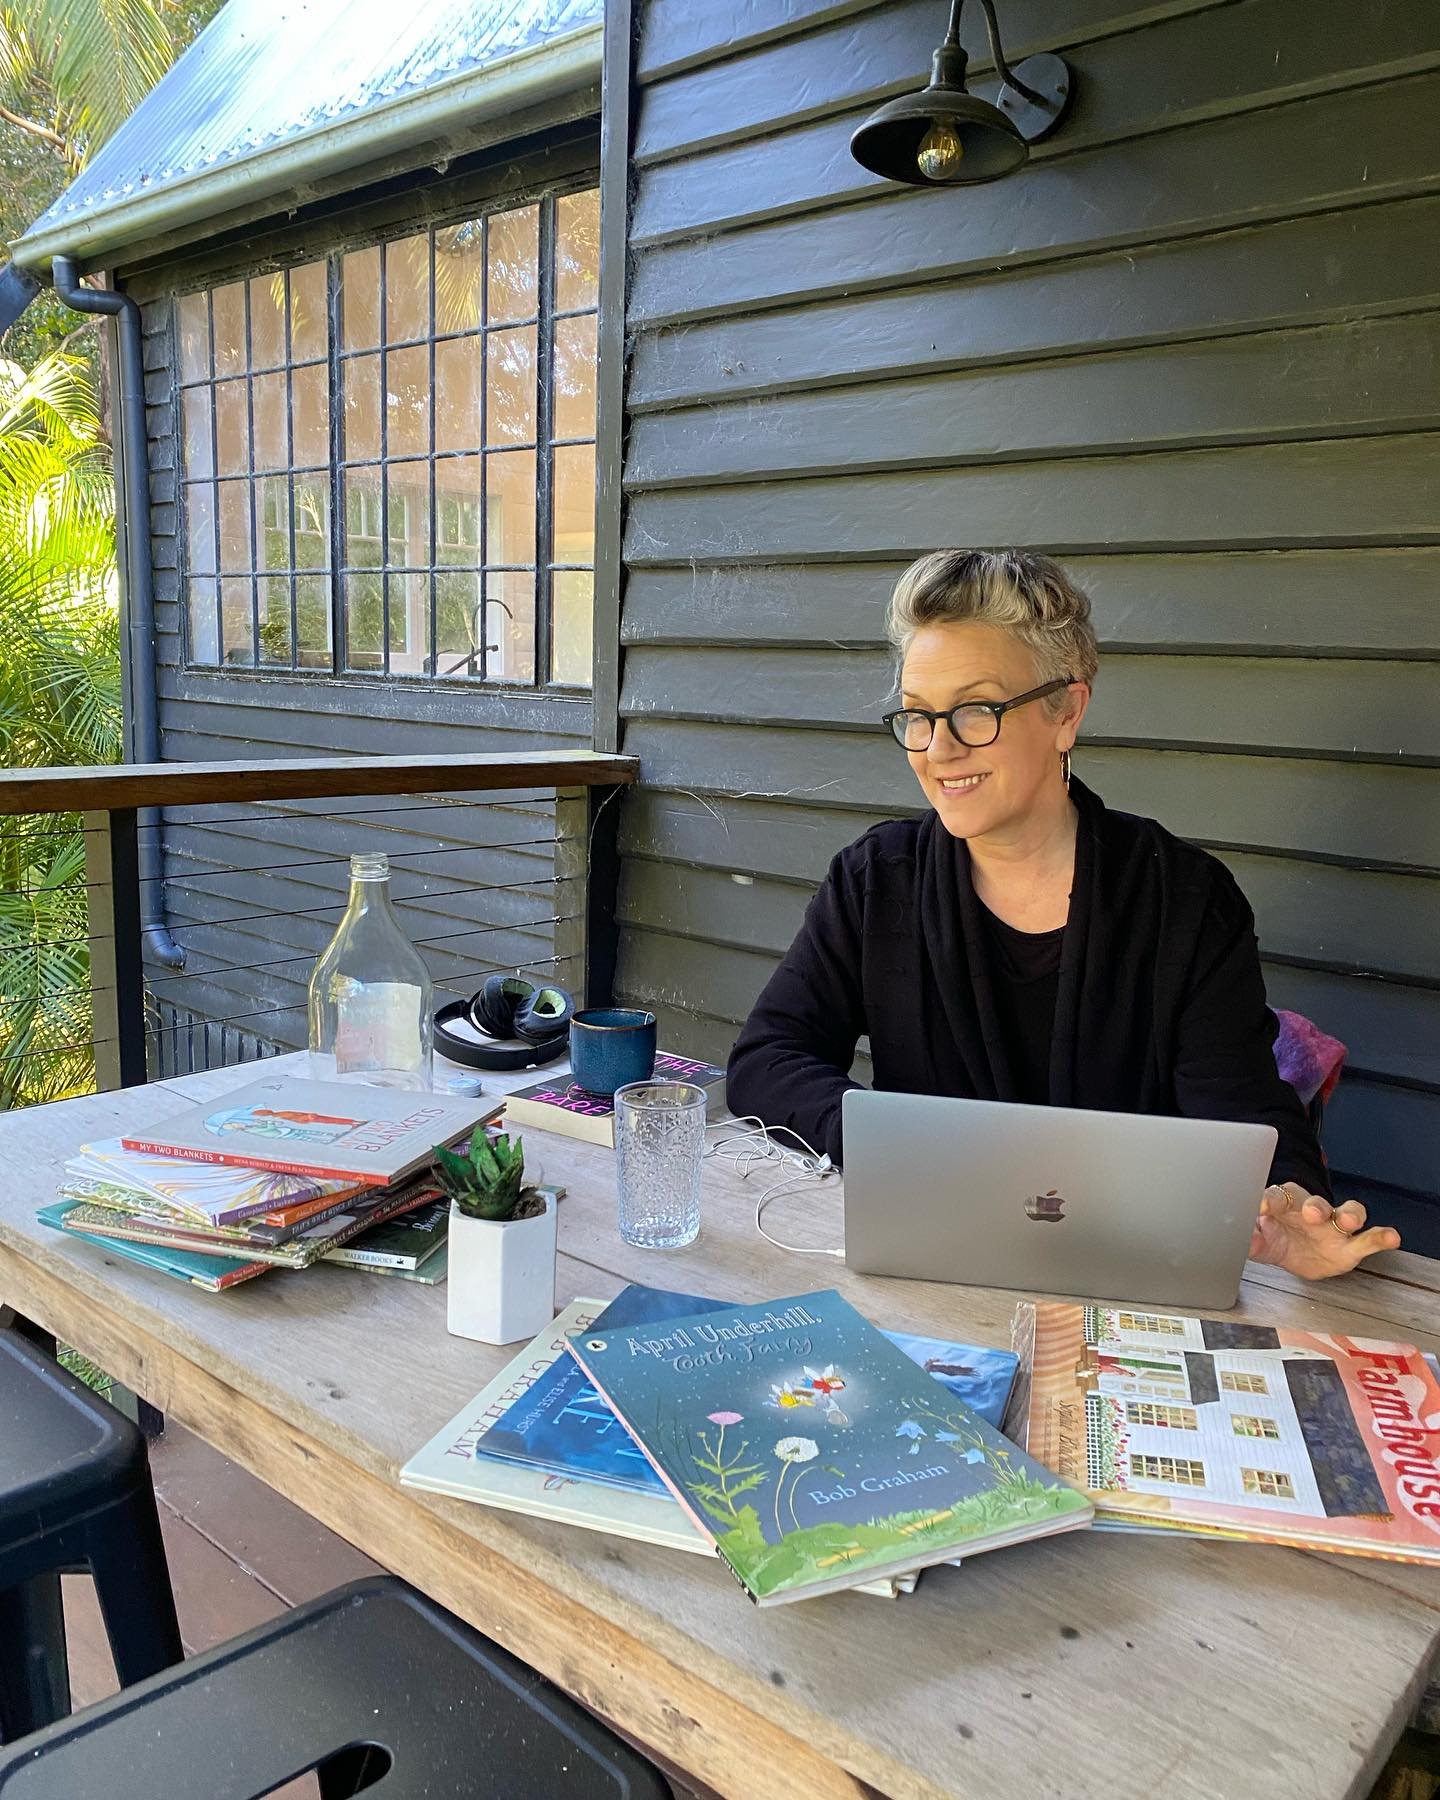 I&rsquo;ve been writing and dreaming up stories here all day - up in the hills behind Byron, with writing friends Zanni and Tristan. 

While I wait for my current work-in-progress to come back from my lovely publisher, I&rsquo;ve been working on pict